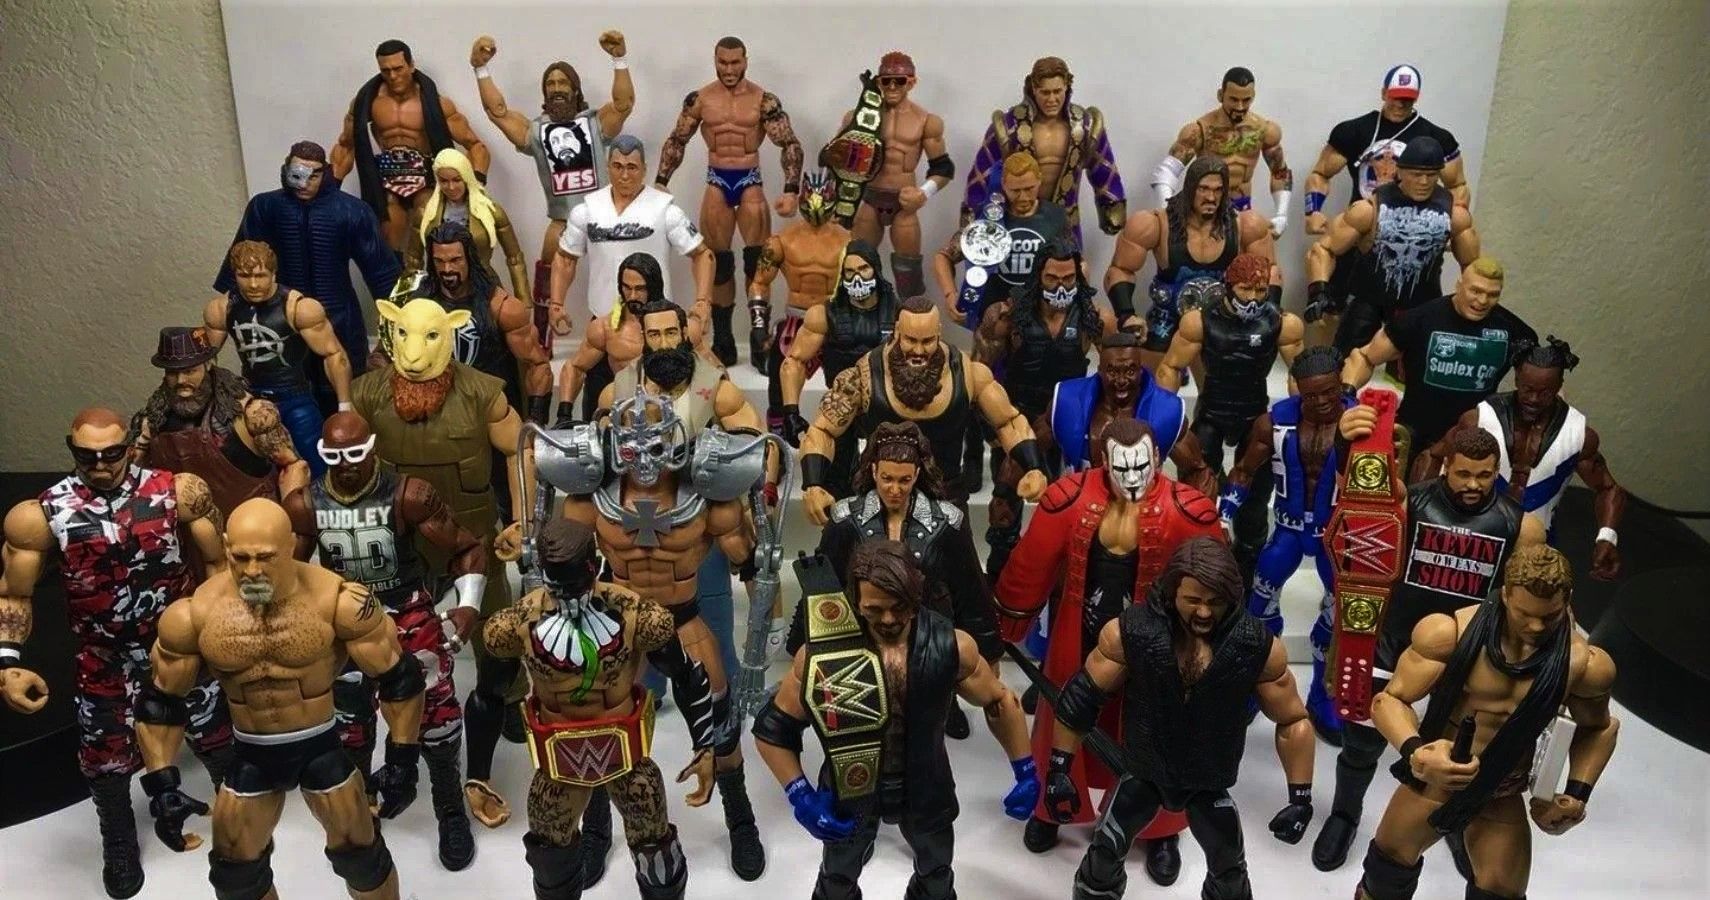 The 10 Worst WWE Action Figures Ever Made, Ranked